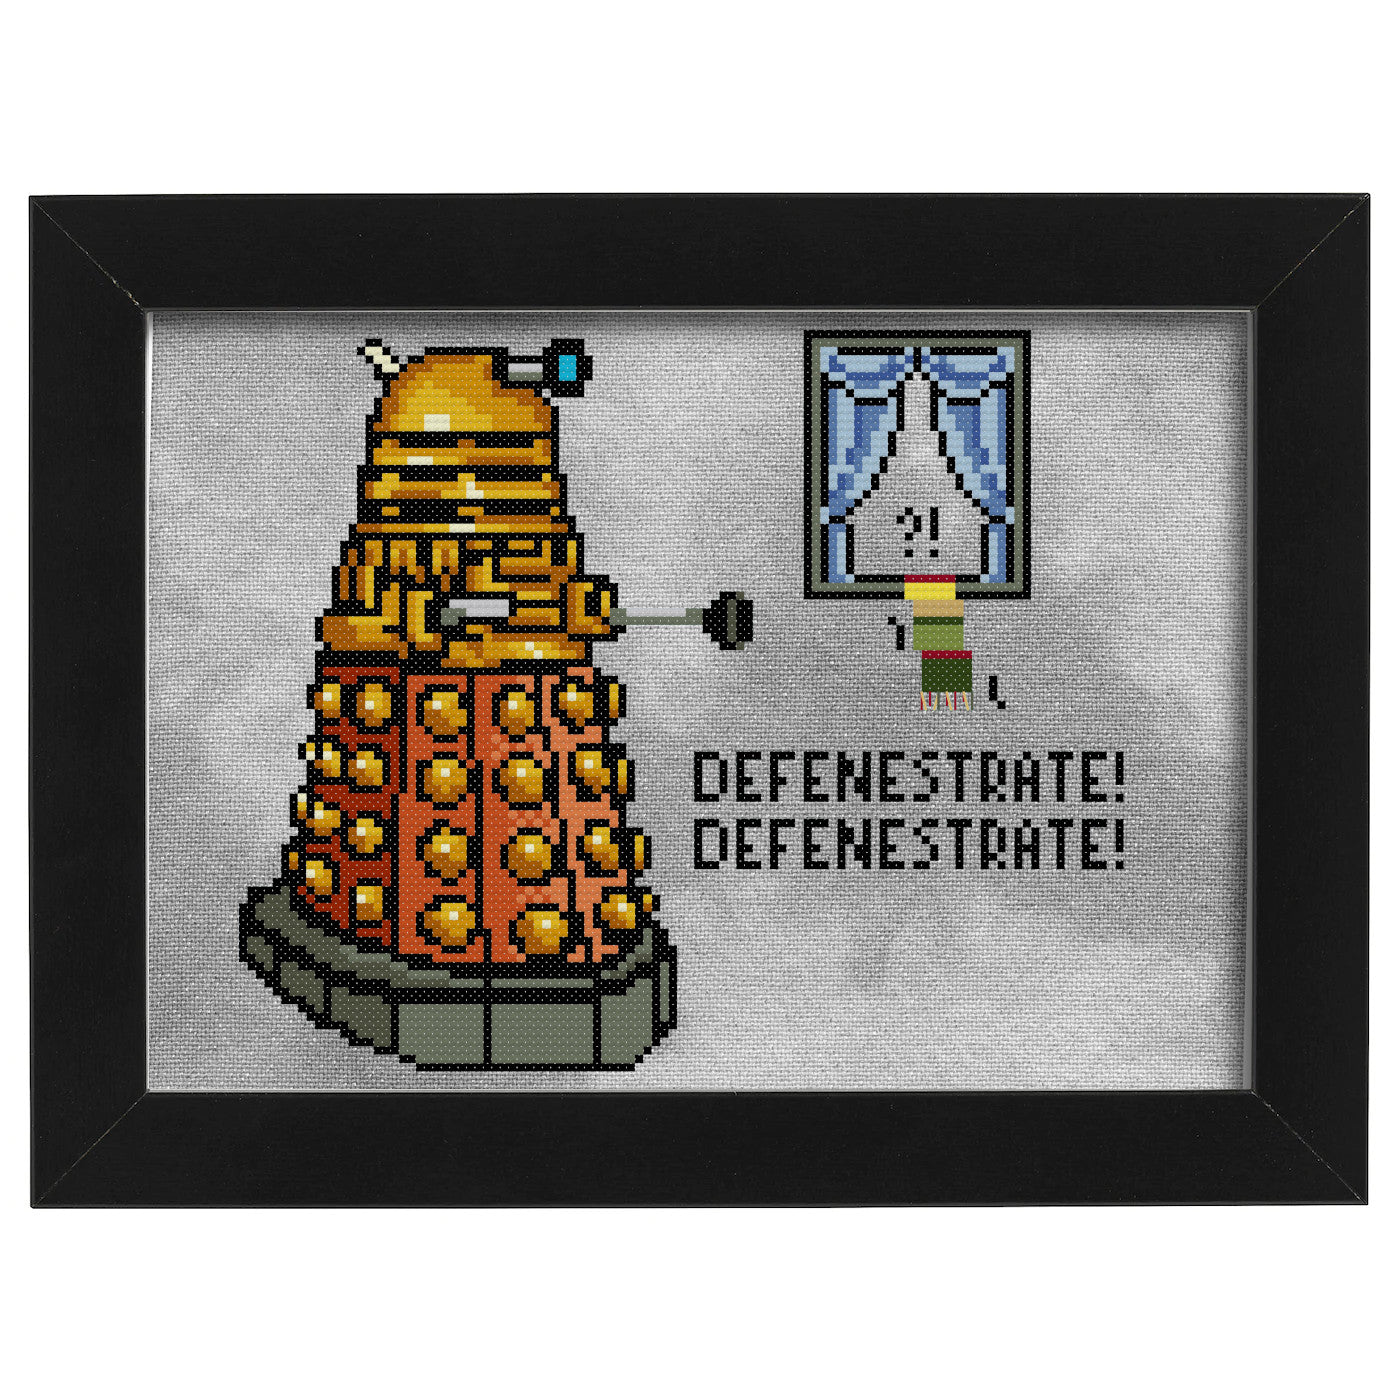 Defenestrate! Funny Doctor Who inspired cross stitch pattern - instant PDF download